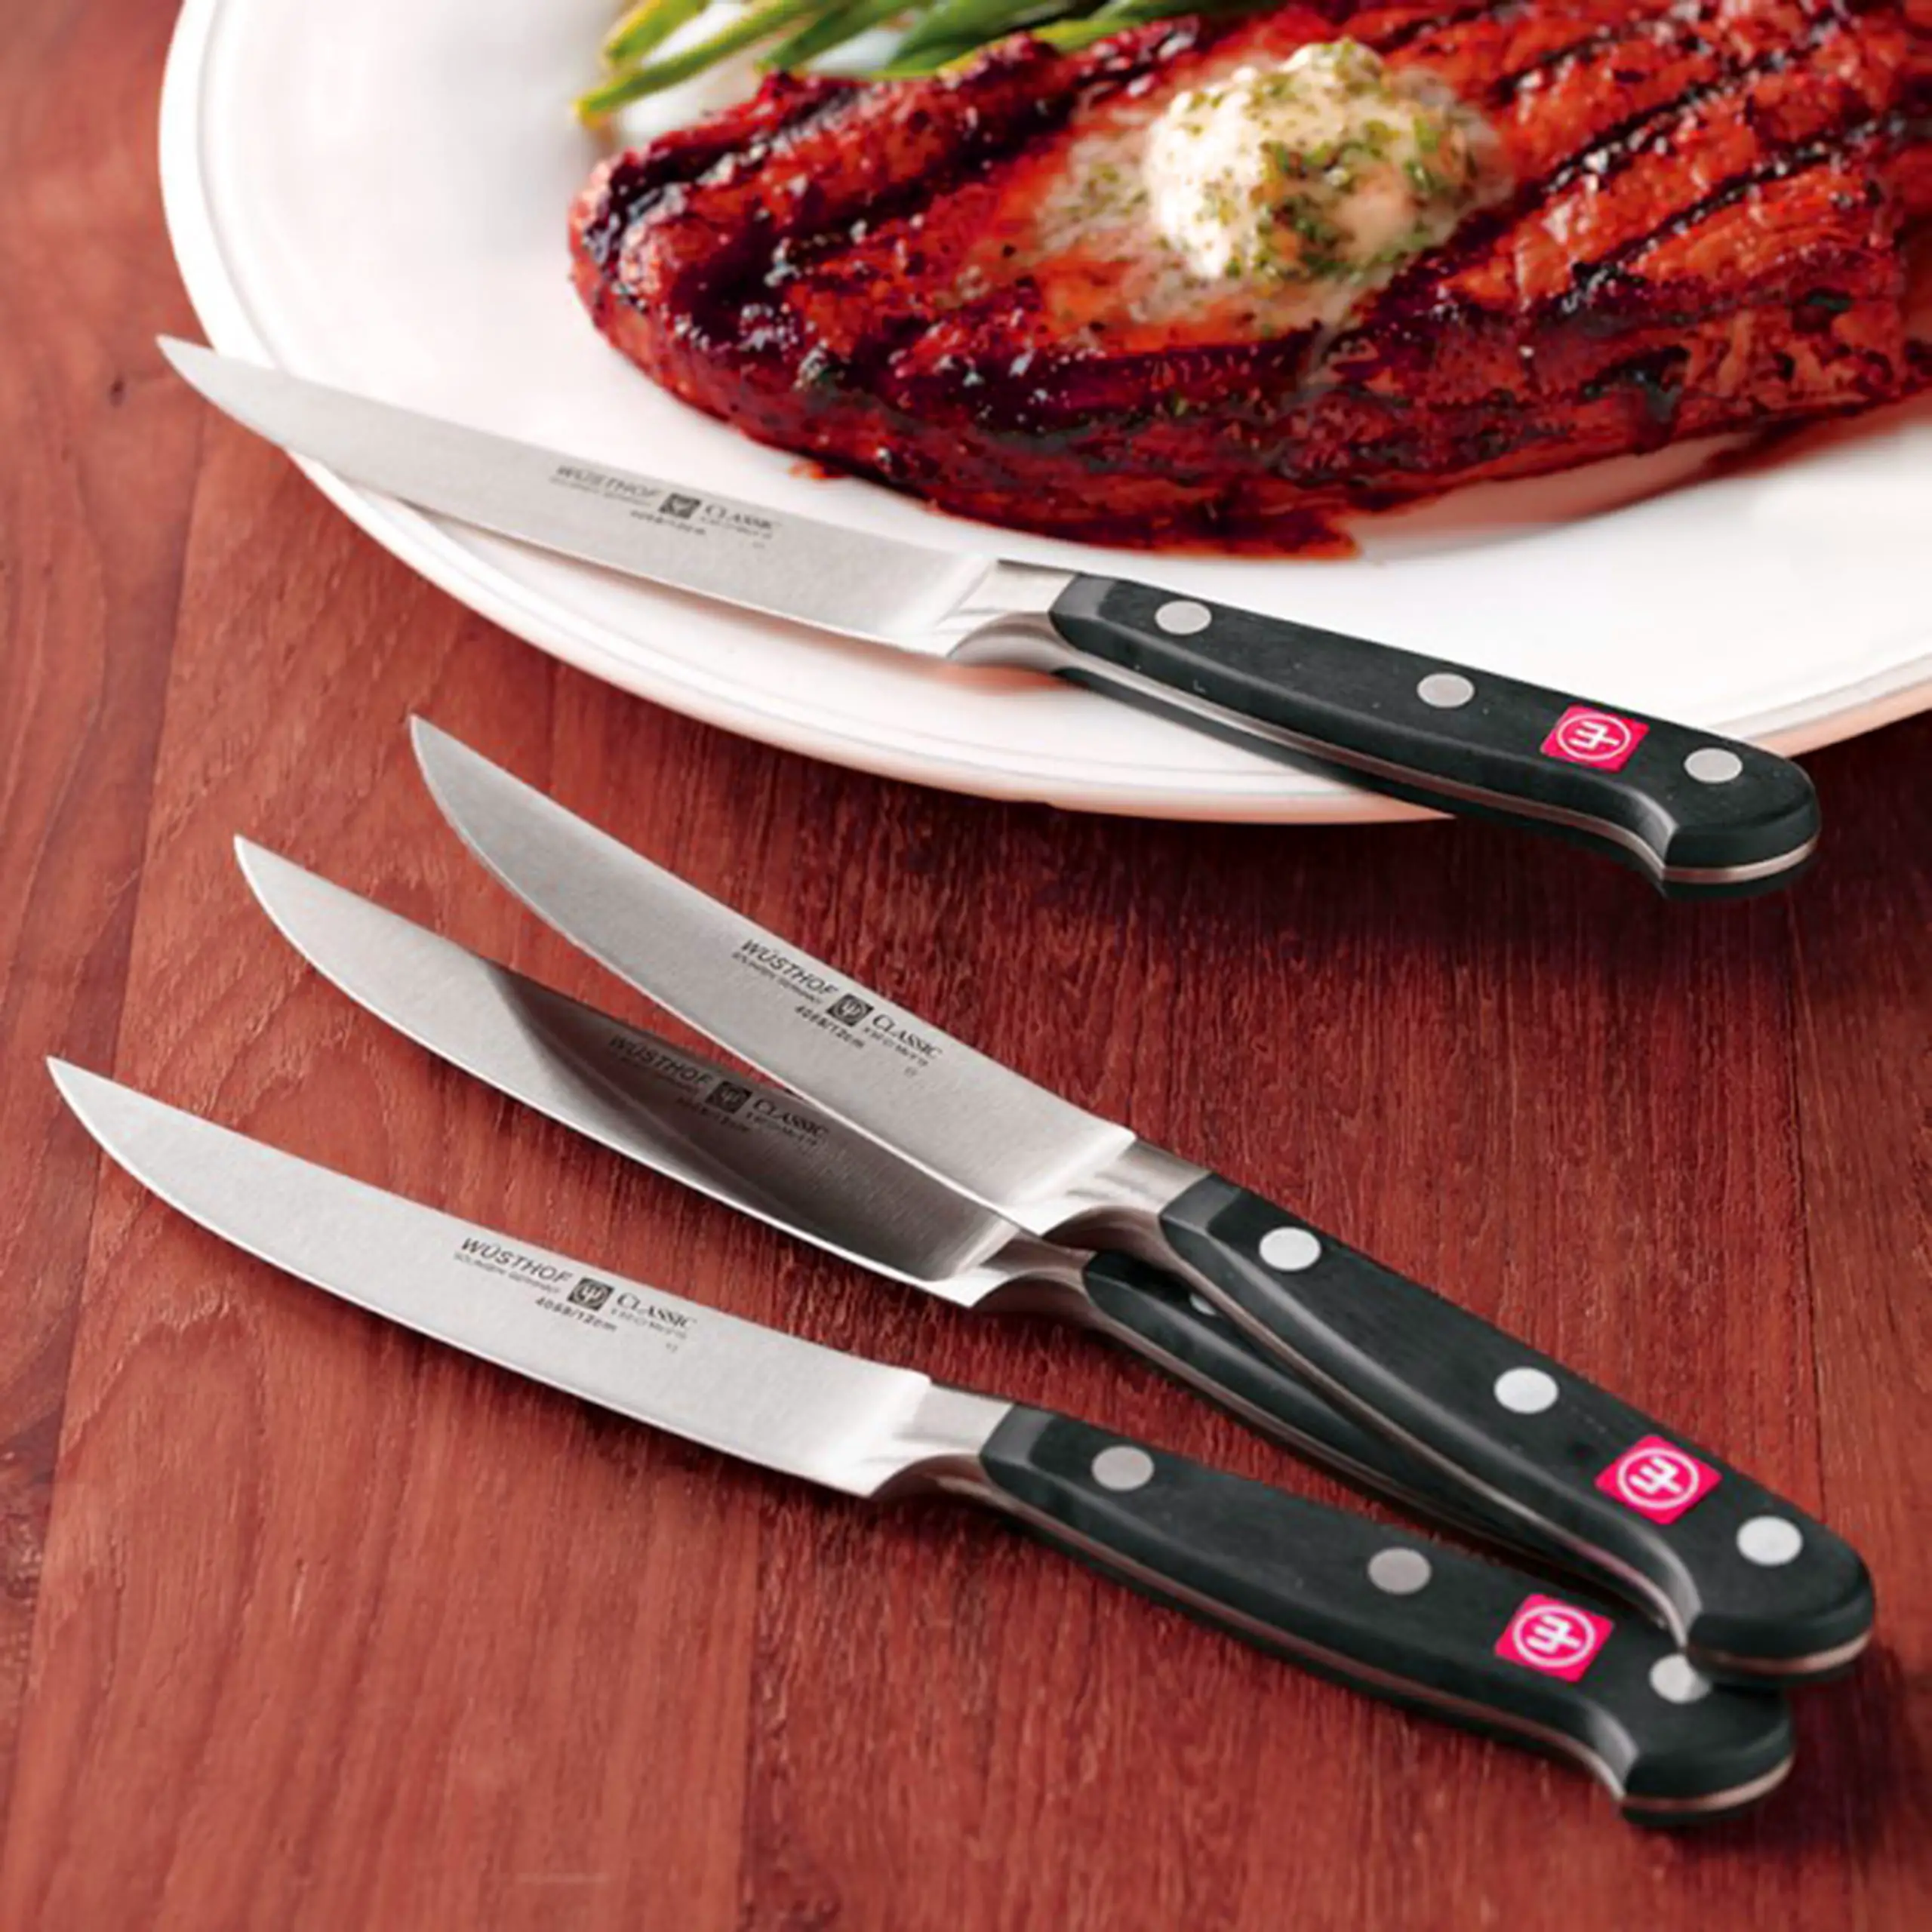 Are Wusthof Steak Knives Worth The Price And Should You Buy It? â Food ...